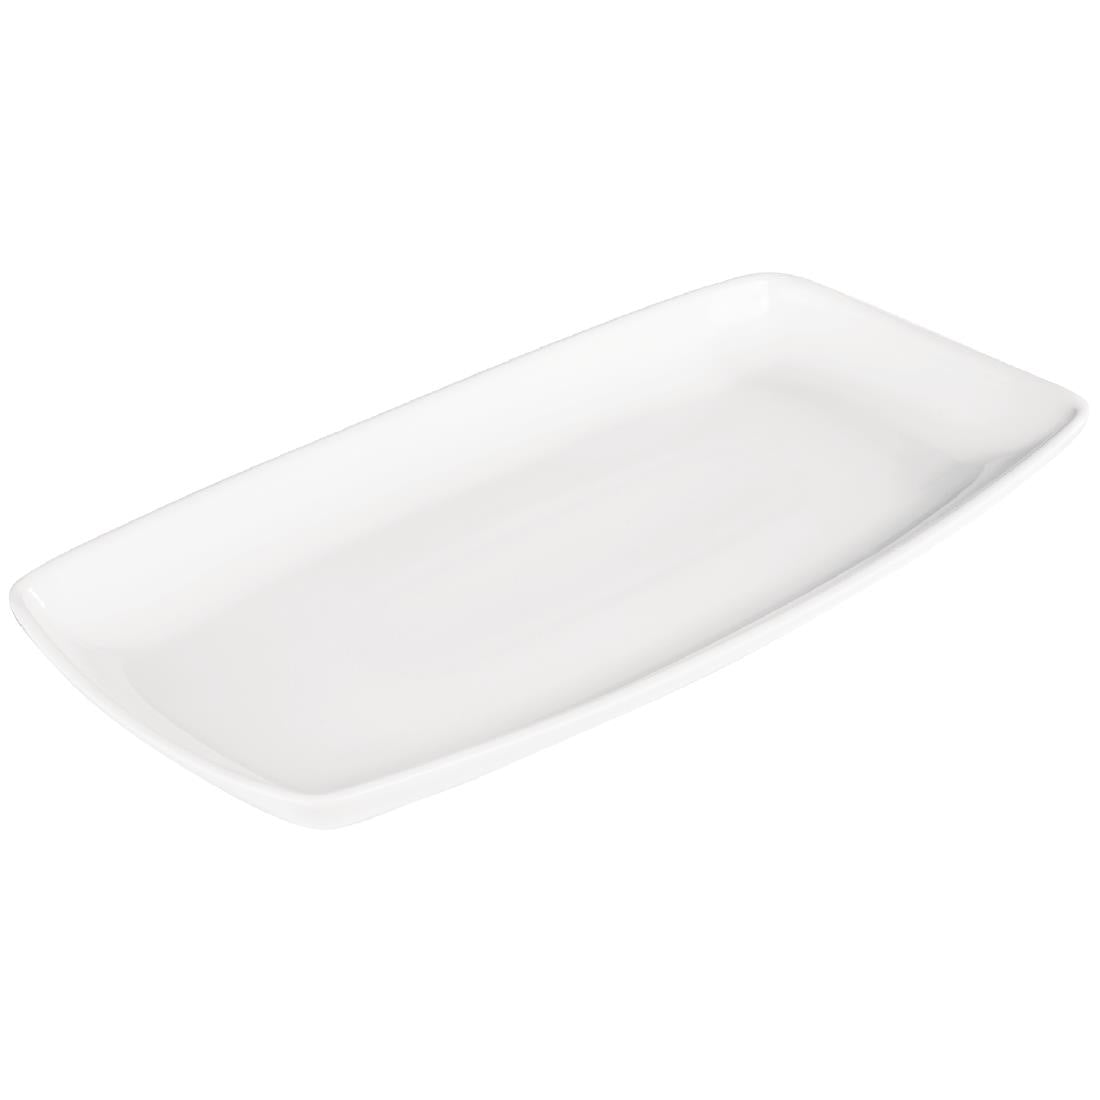 DP231 Churchill X Squared Oblong Plates 197x 102mm (Pack of 12) JD Catering Equipment Solutions Ltd